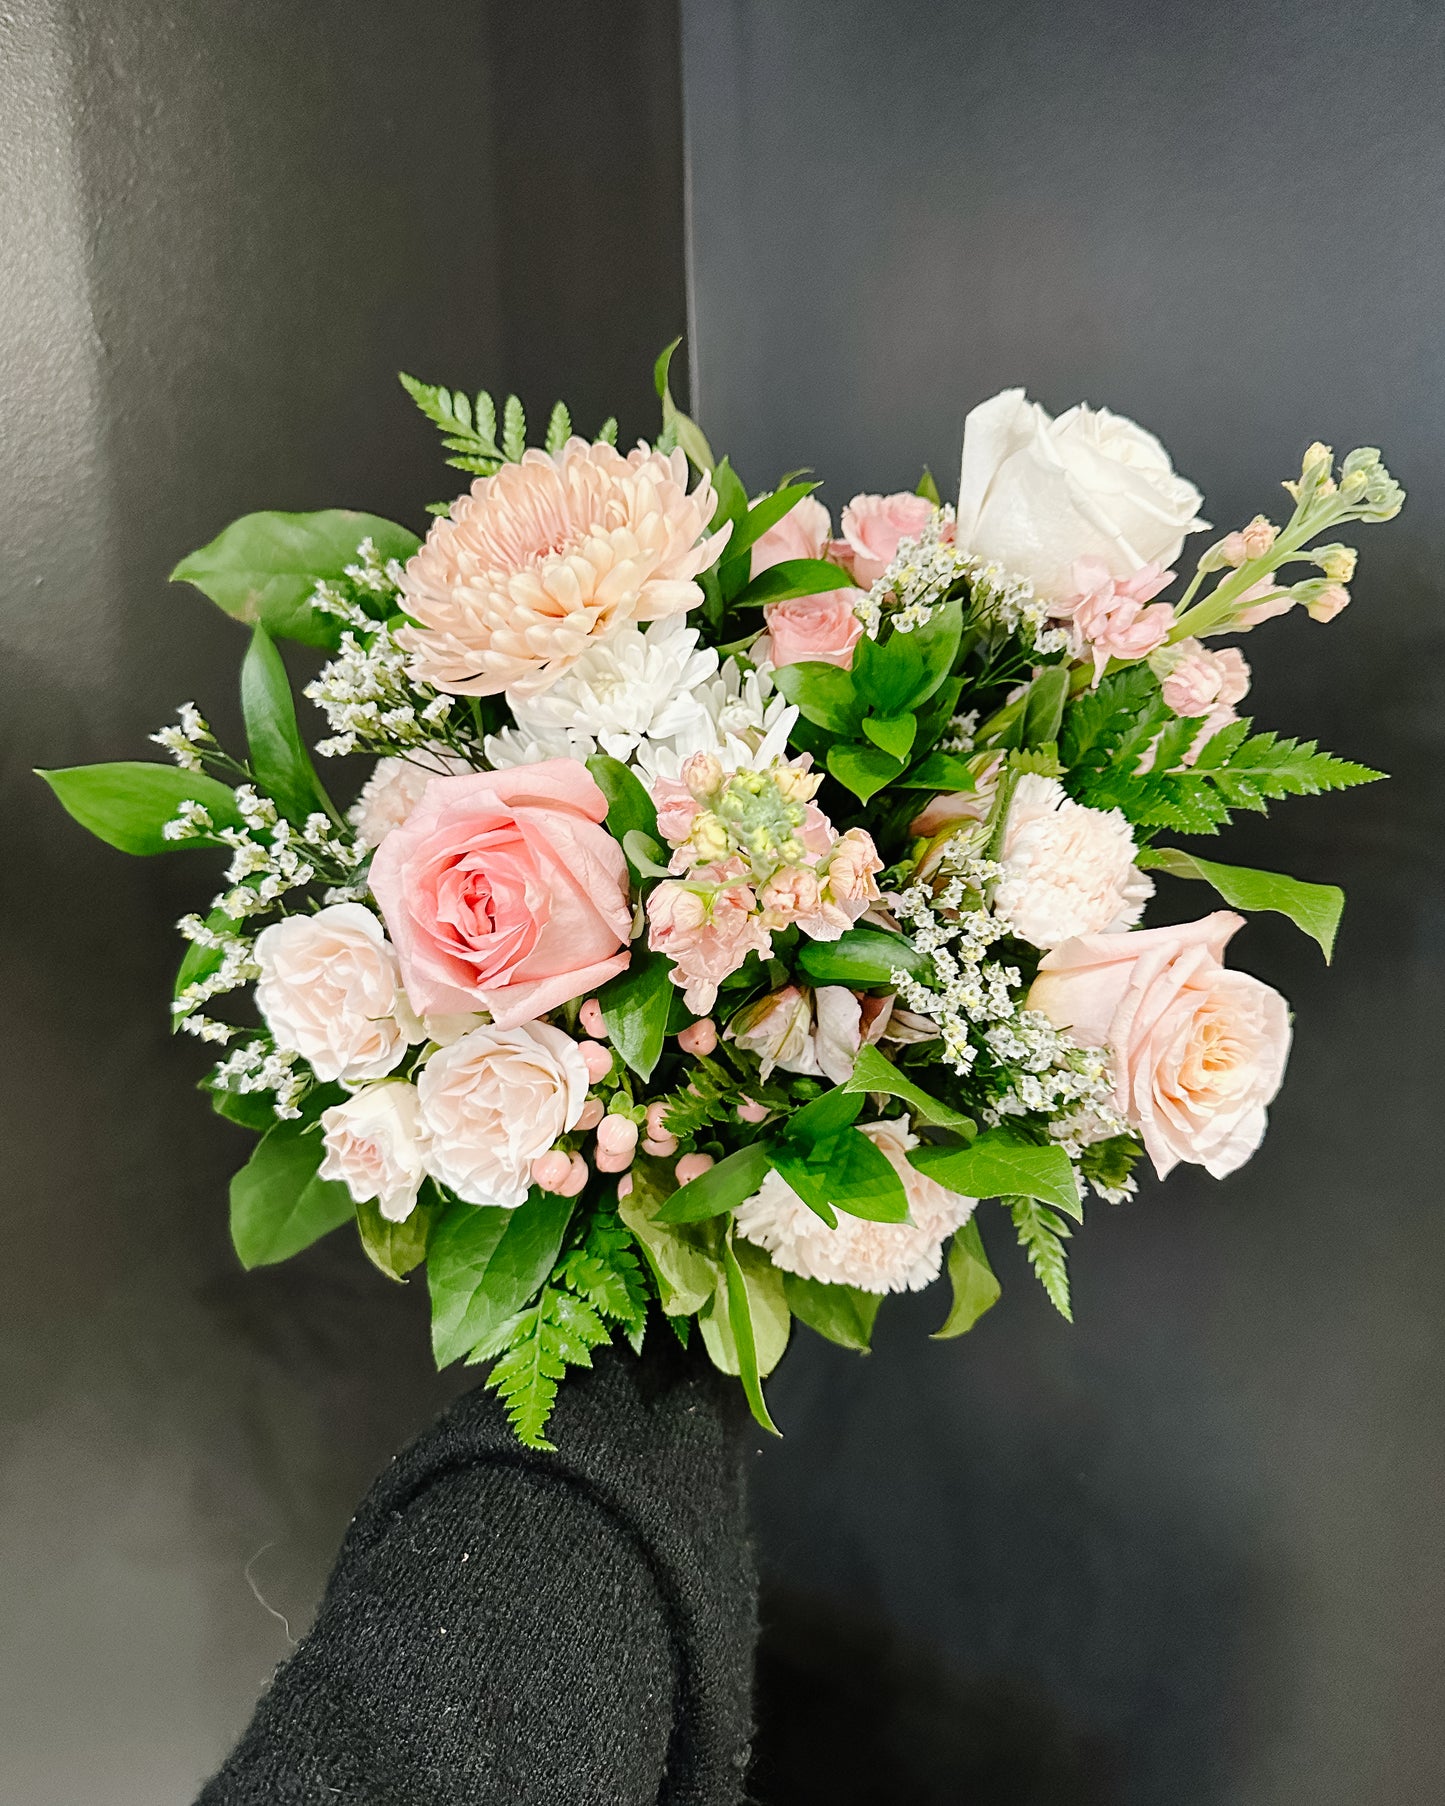 "Pink & Pretty" Mother's Day Bouquet